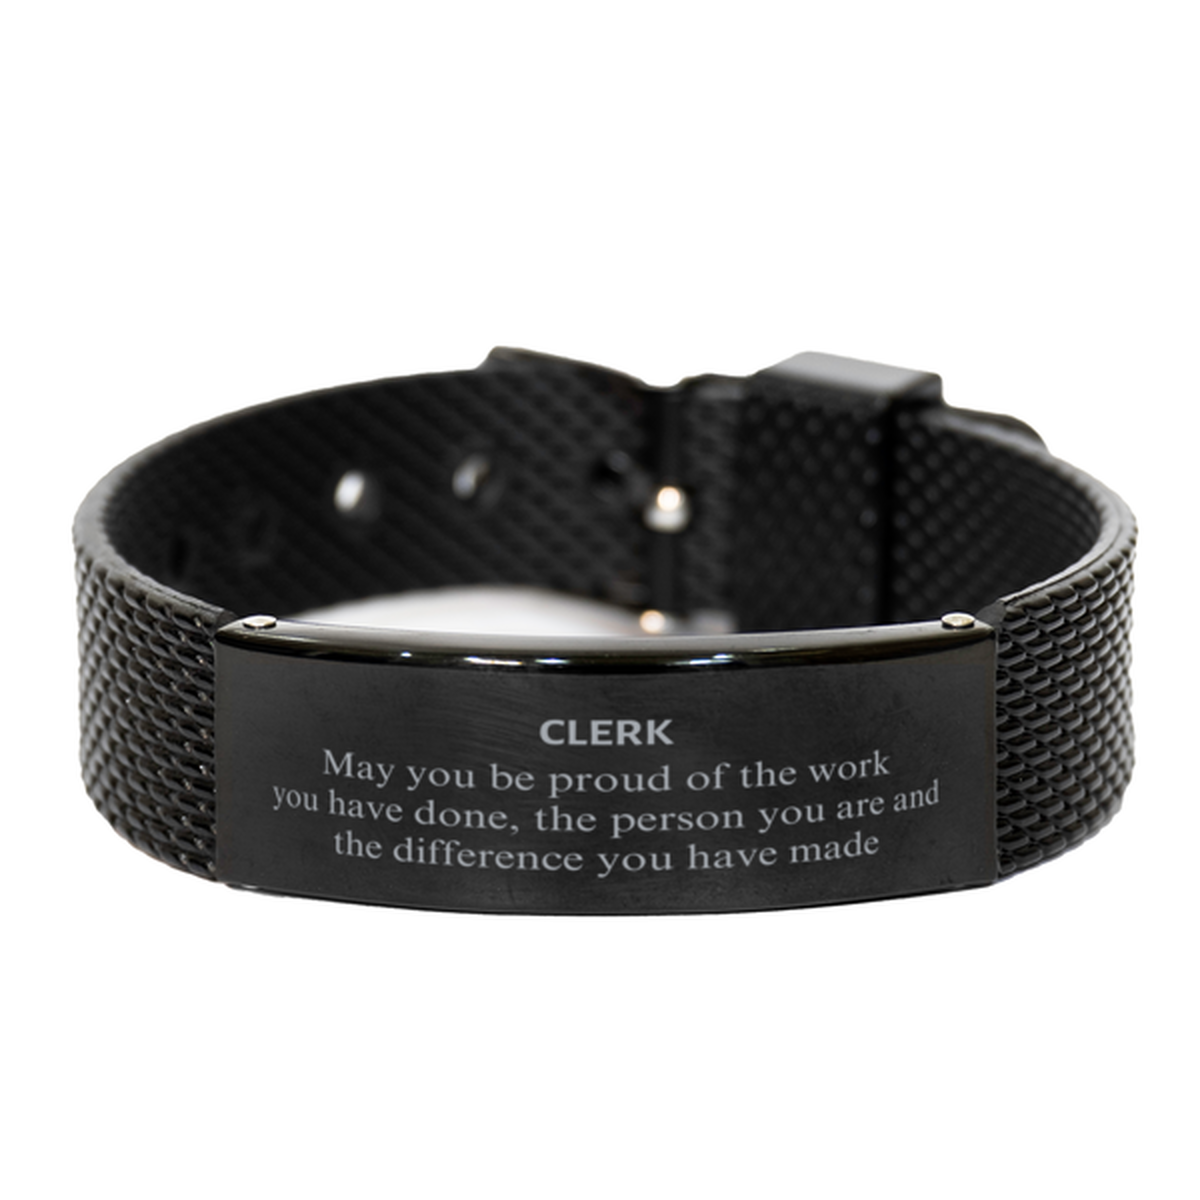 Clerk May you be proud of the work you have done, Retirement Clerk Black Shark Mesh Bracelet for Colleague Appreciation Gifts Amazing for Clerk